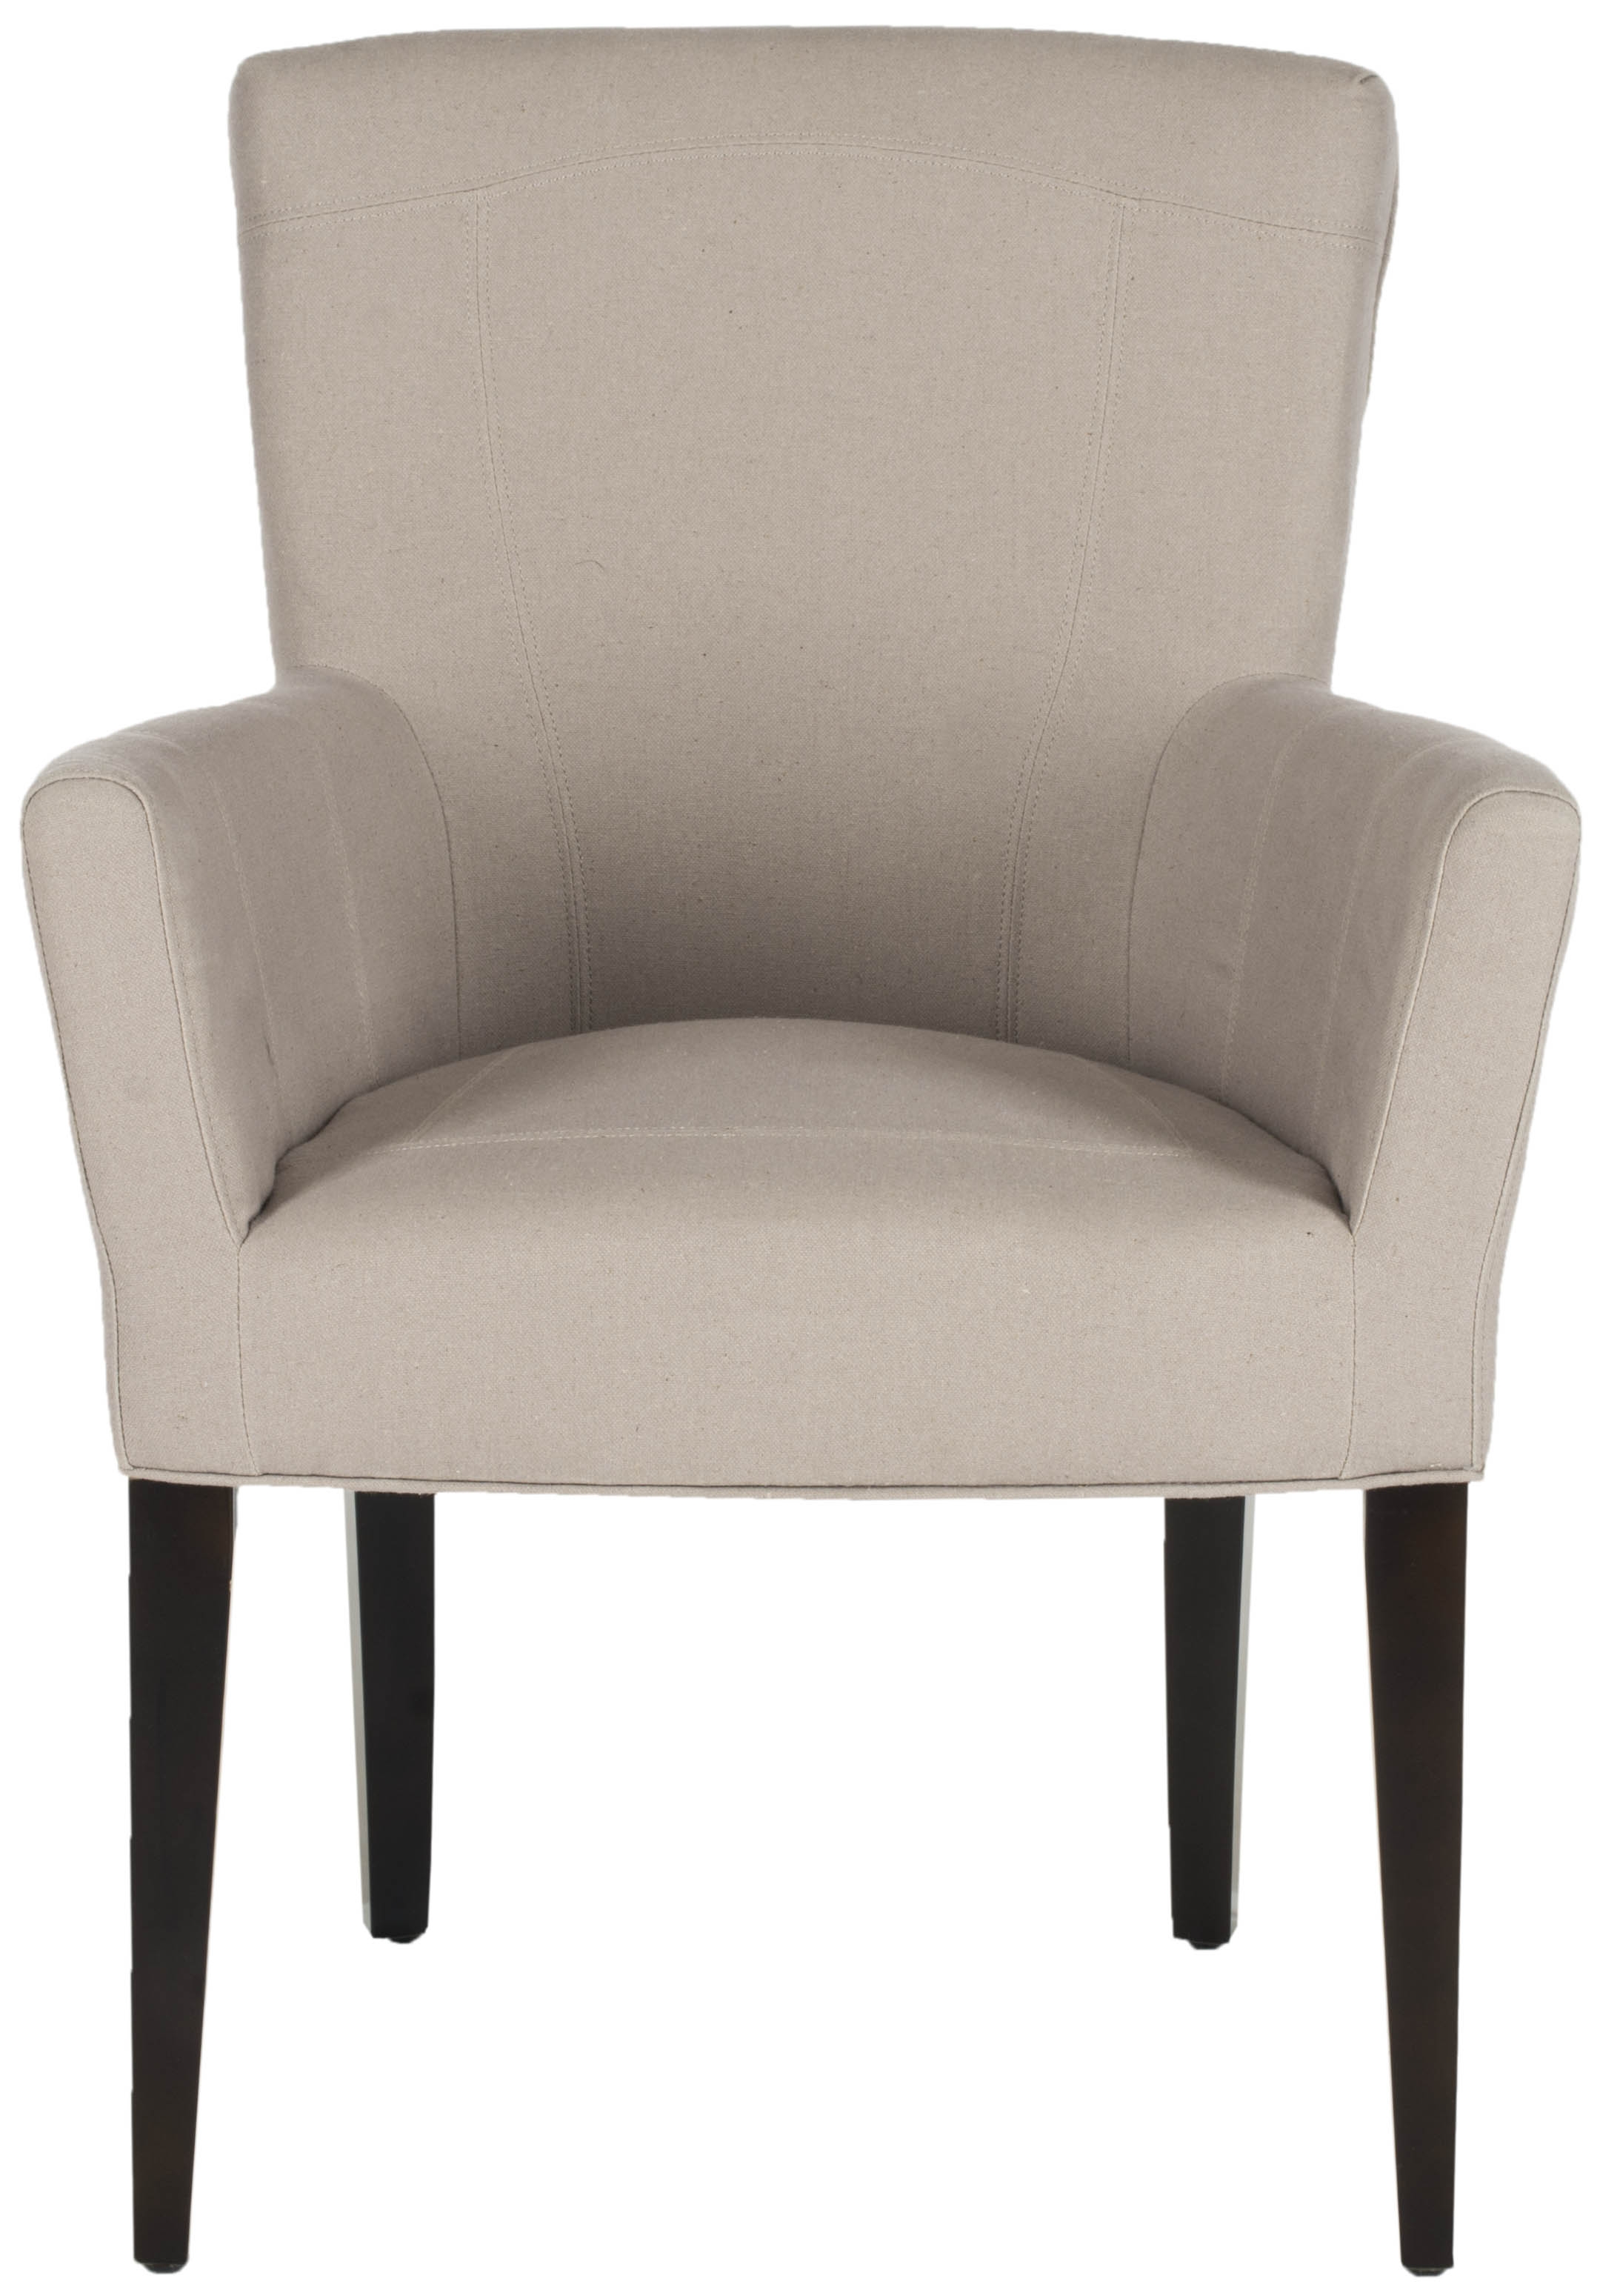 Dale Arm Chair - Taupe/Espresso - Arlo Home - Image 0